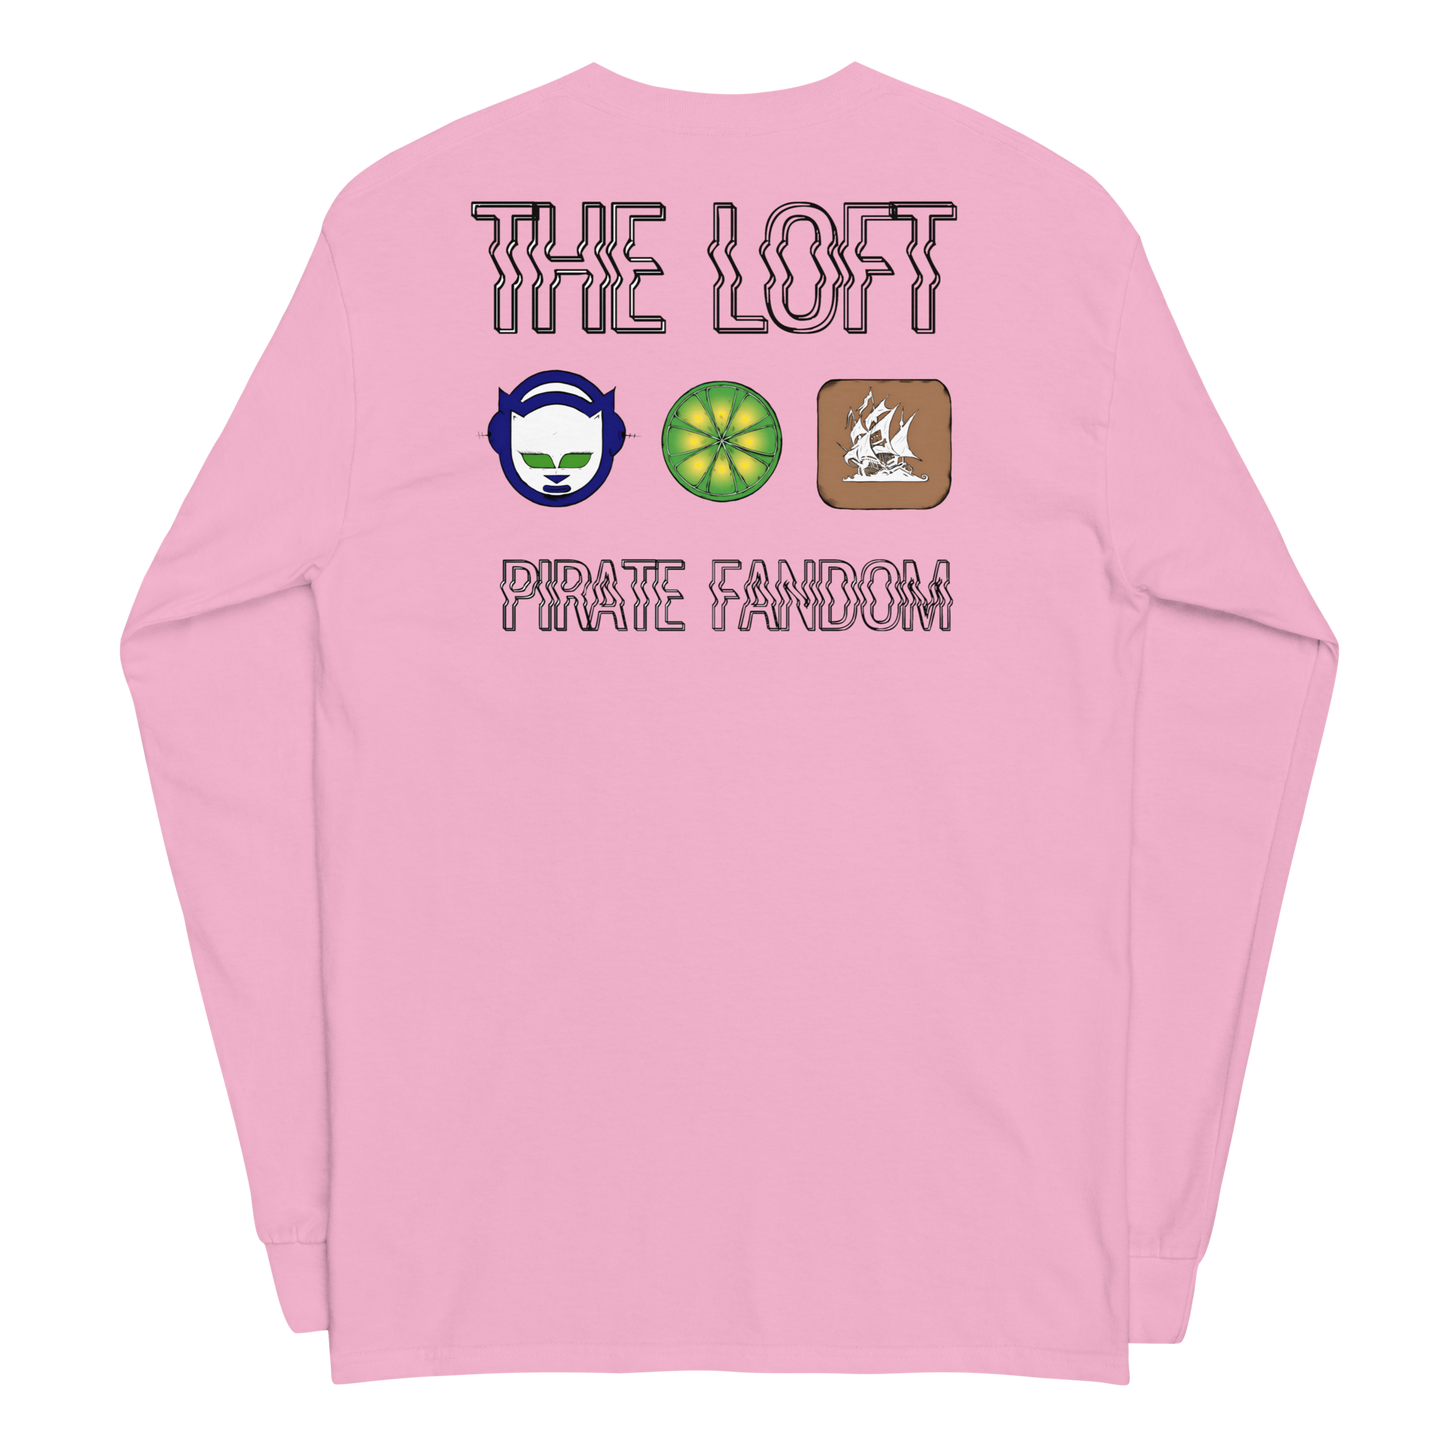 The LOFT - DOWNLOAD THE WORLD Tee